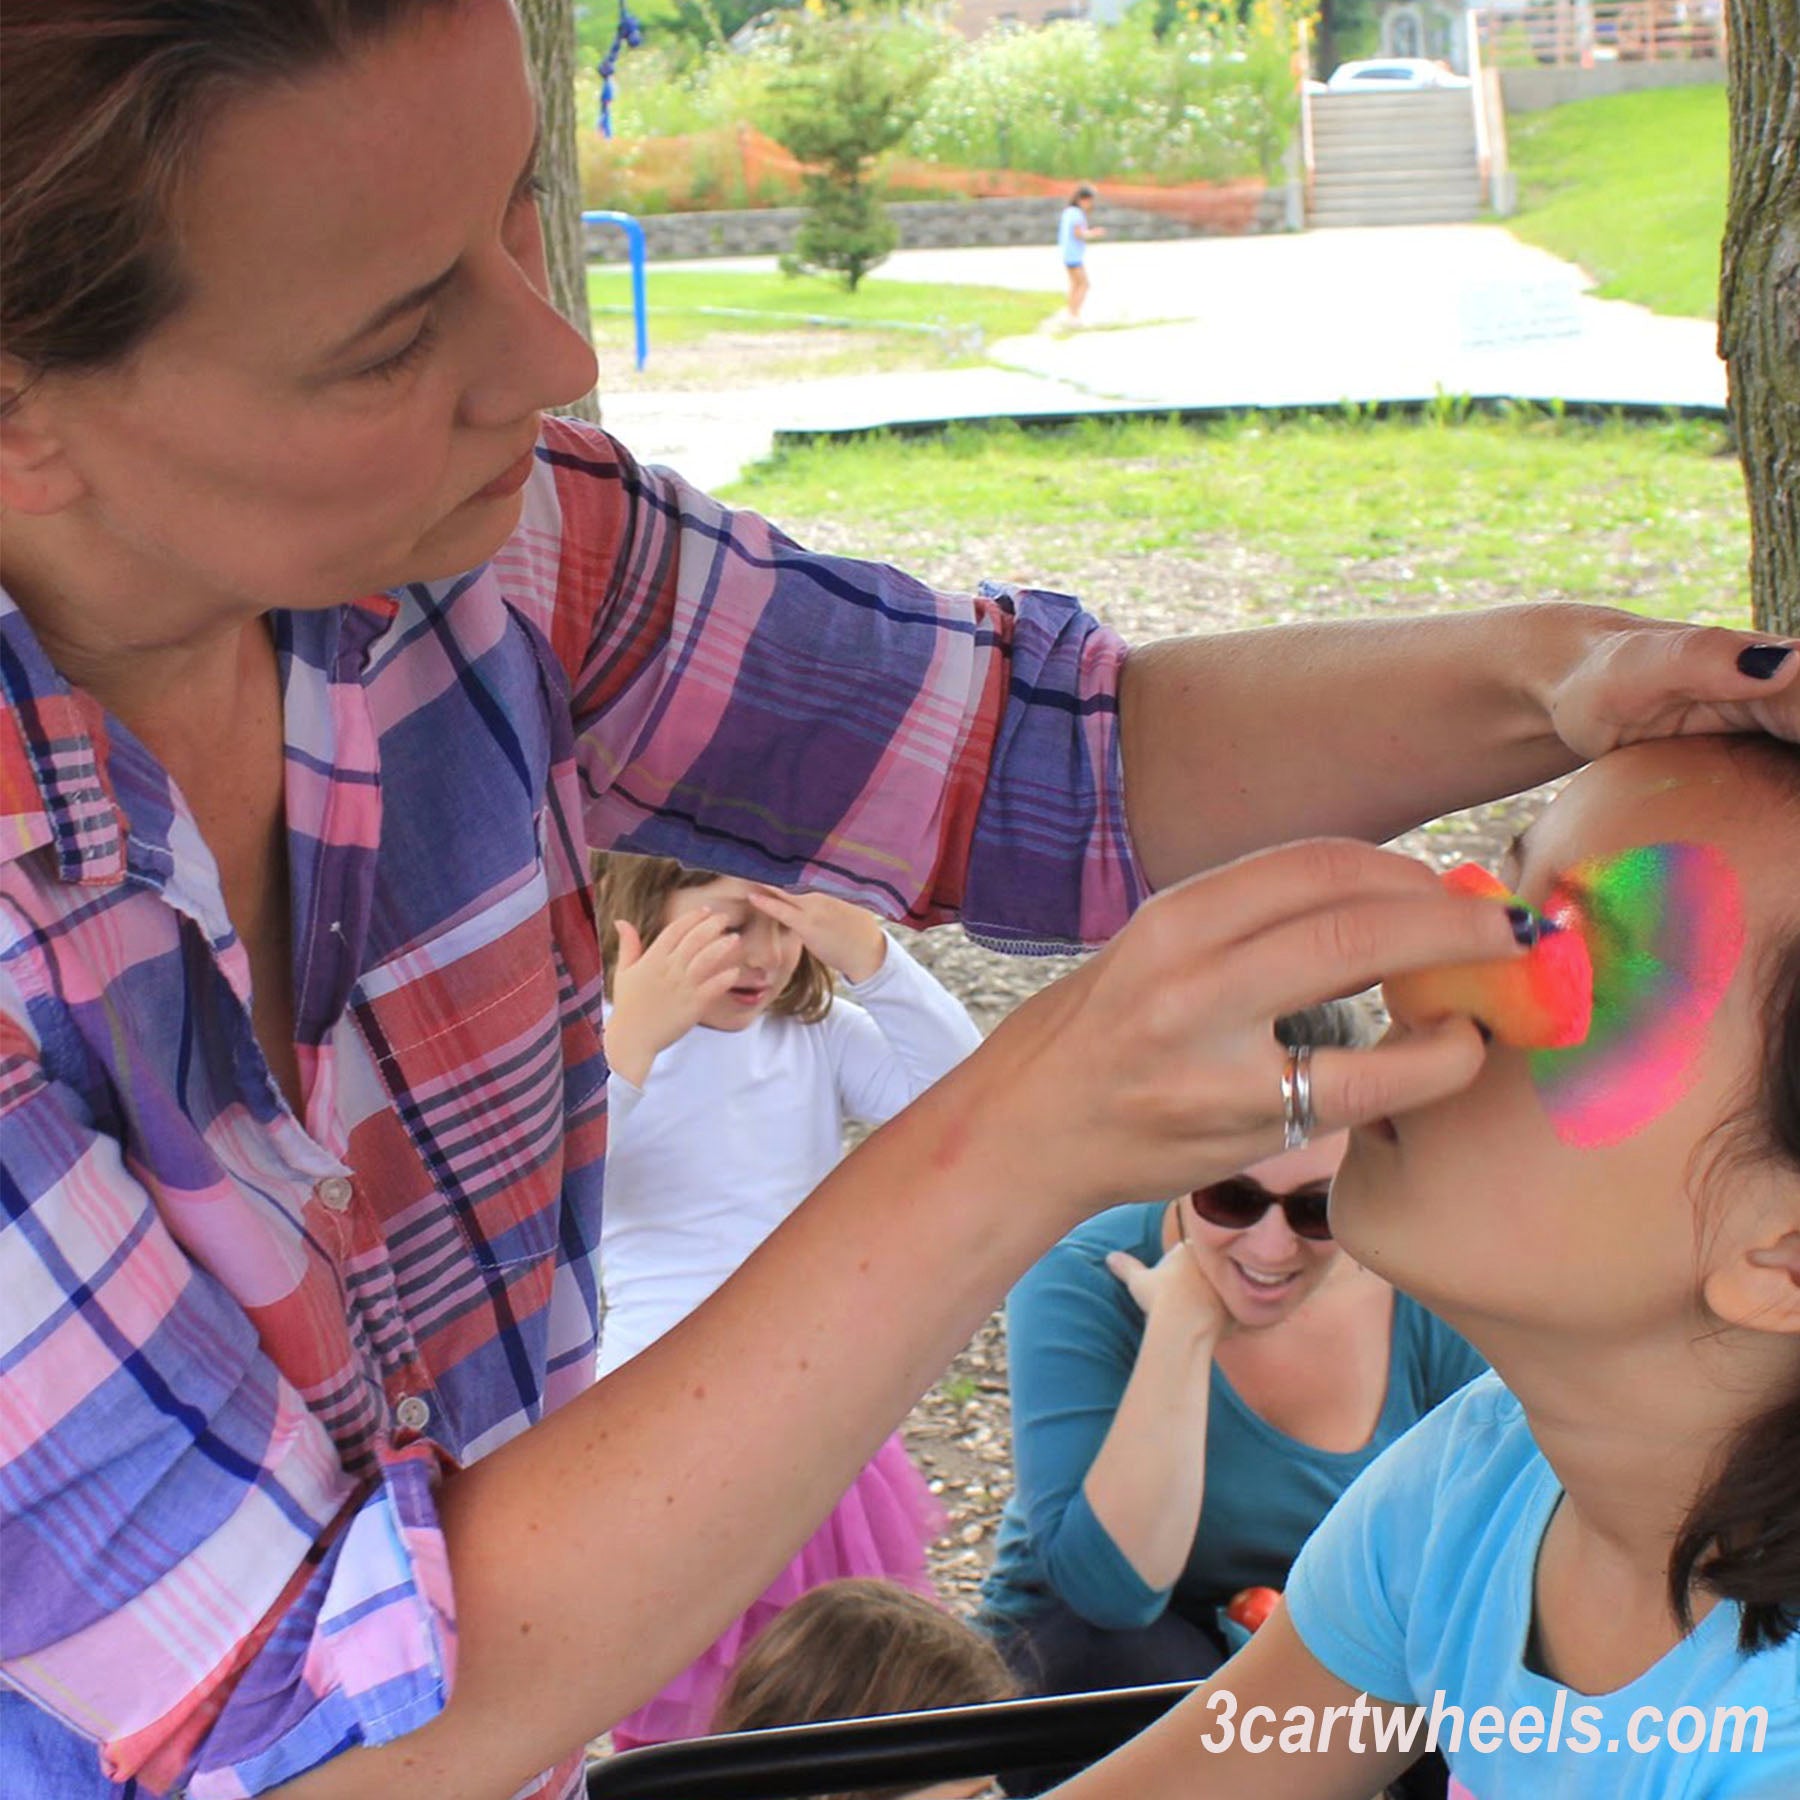 How to Become a Professional Face Painter